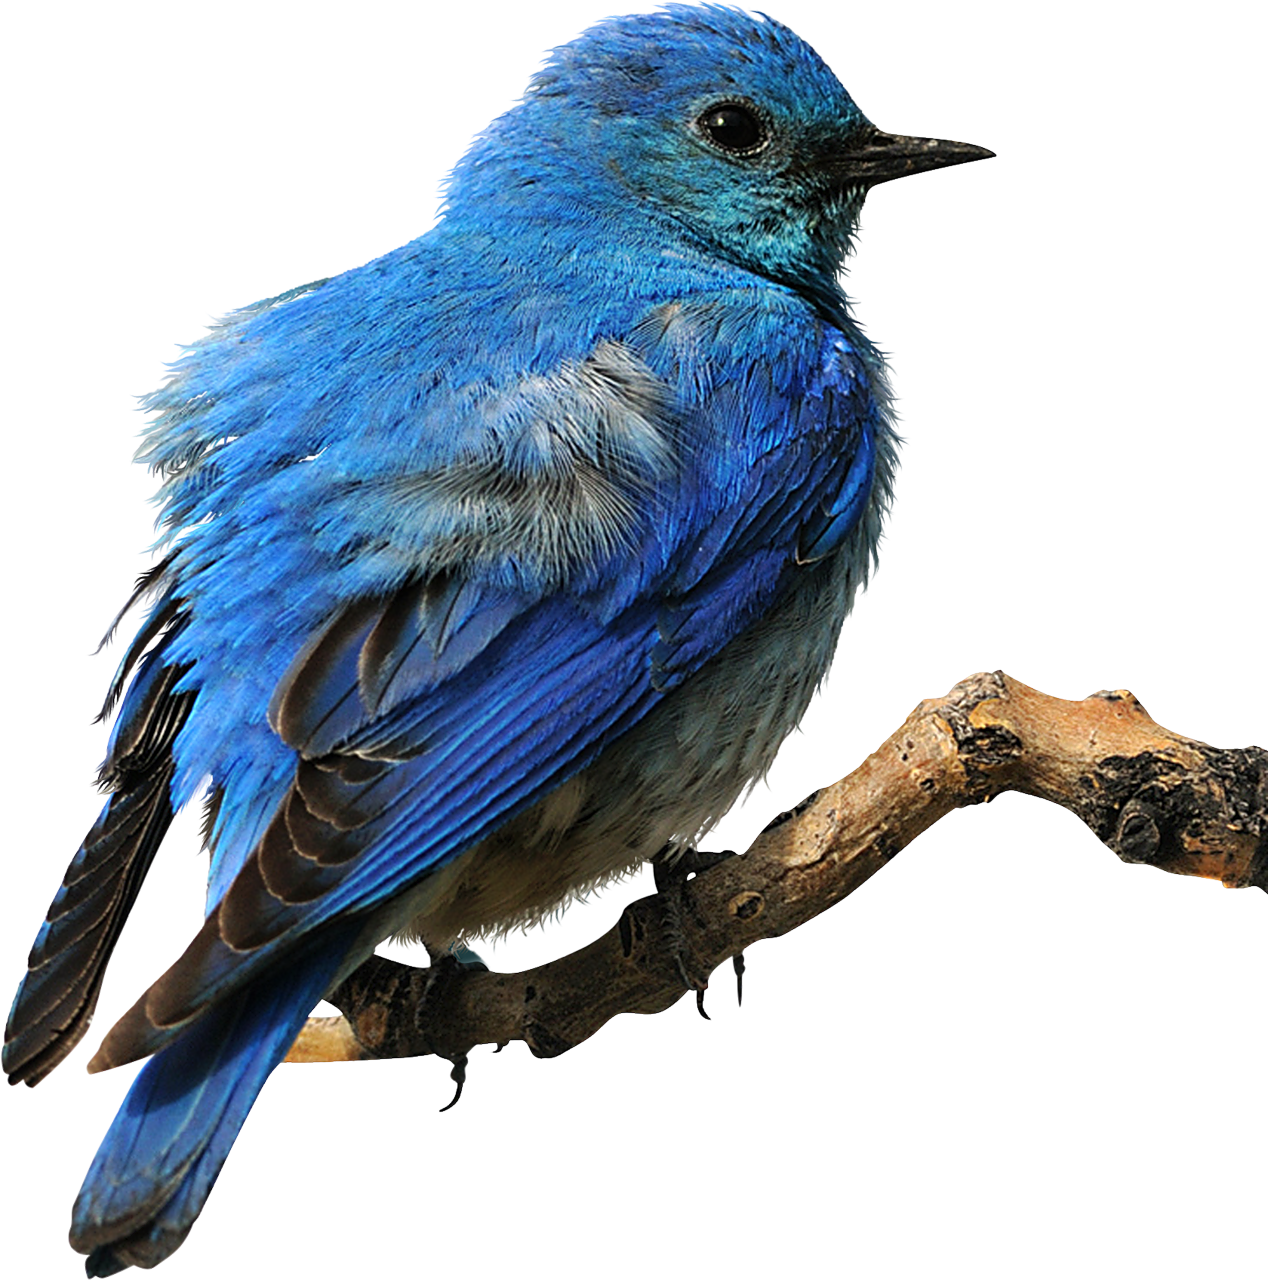 Blue Bird Png Png Image Collection